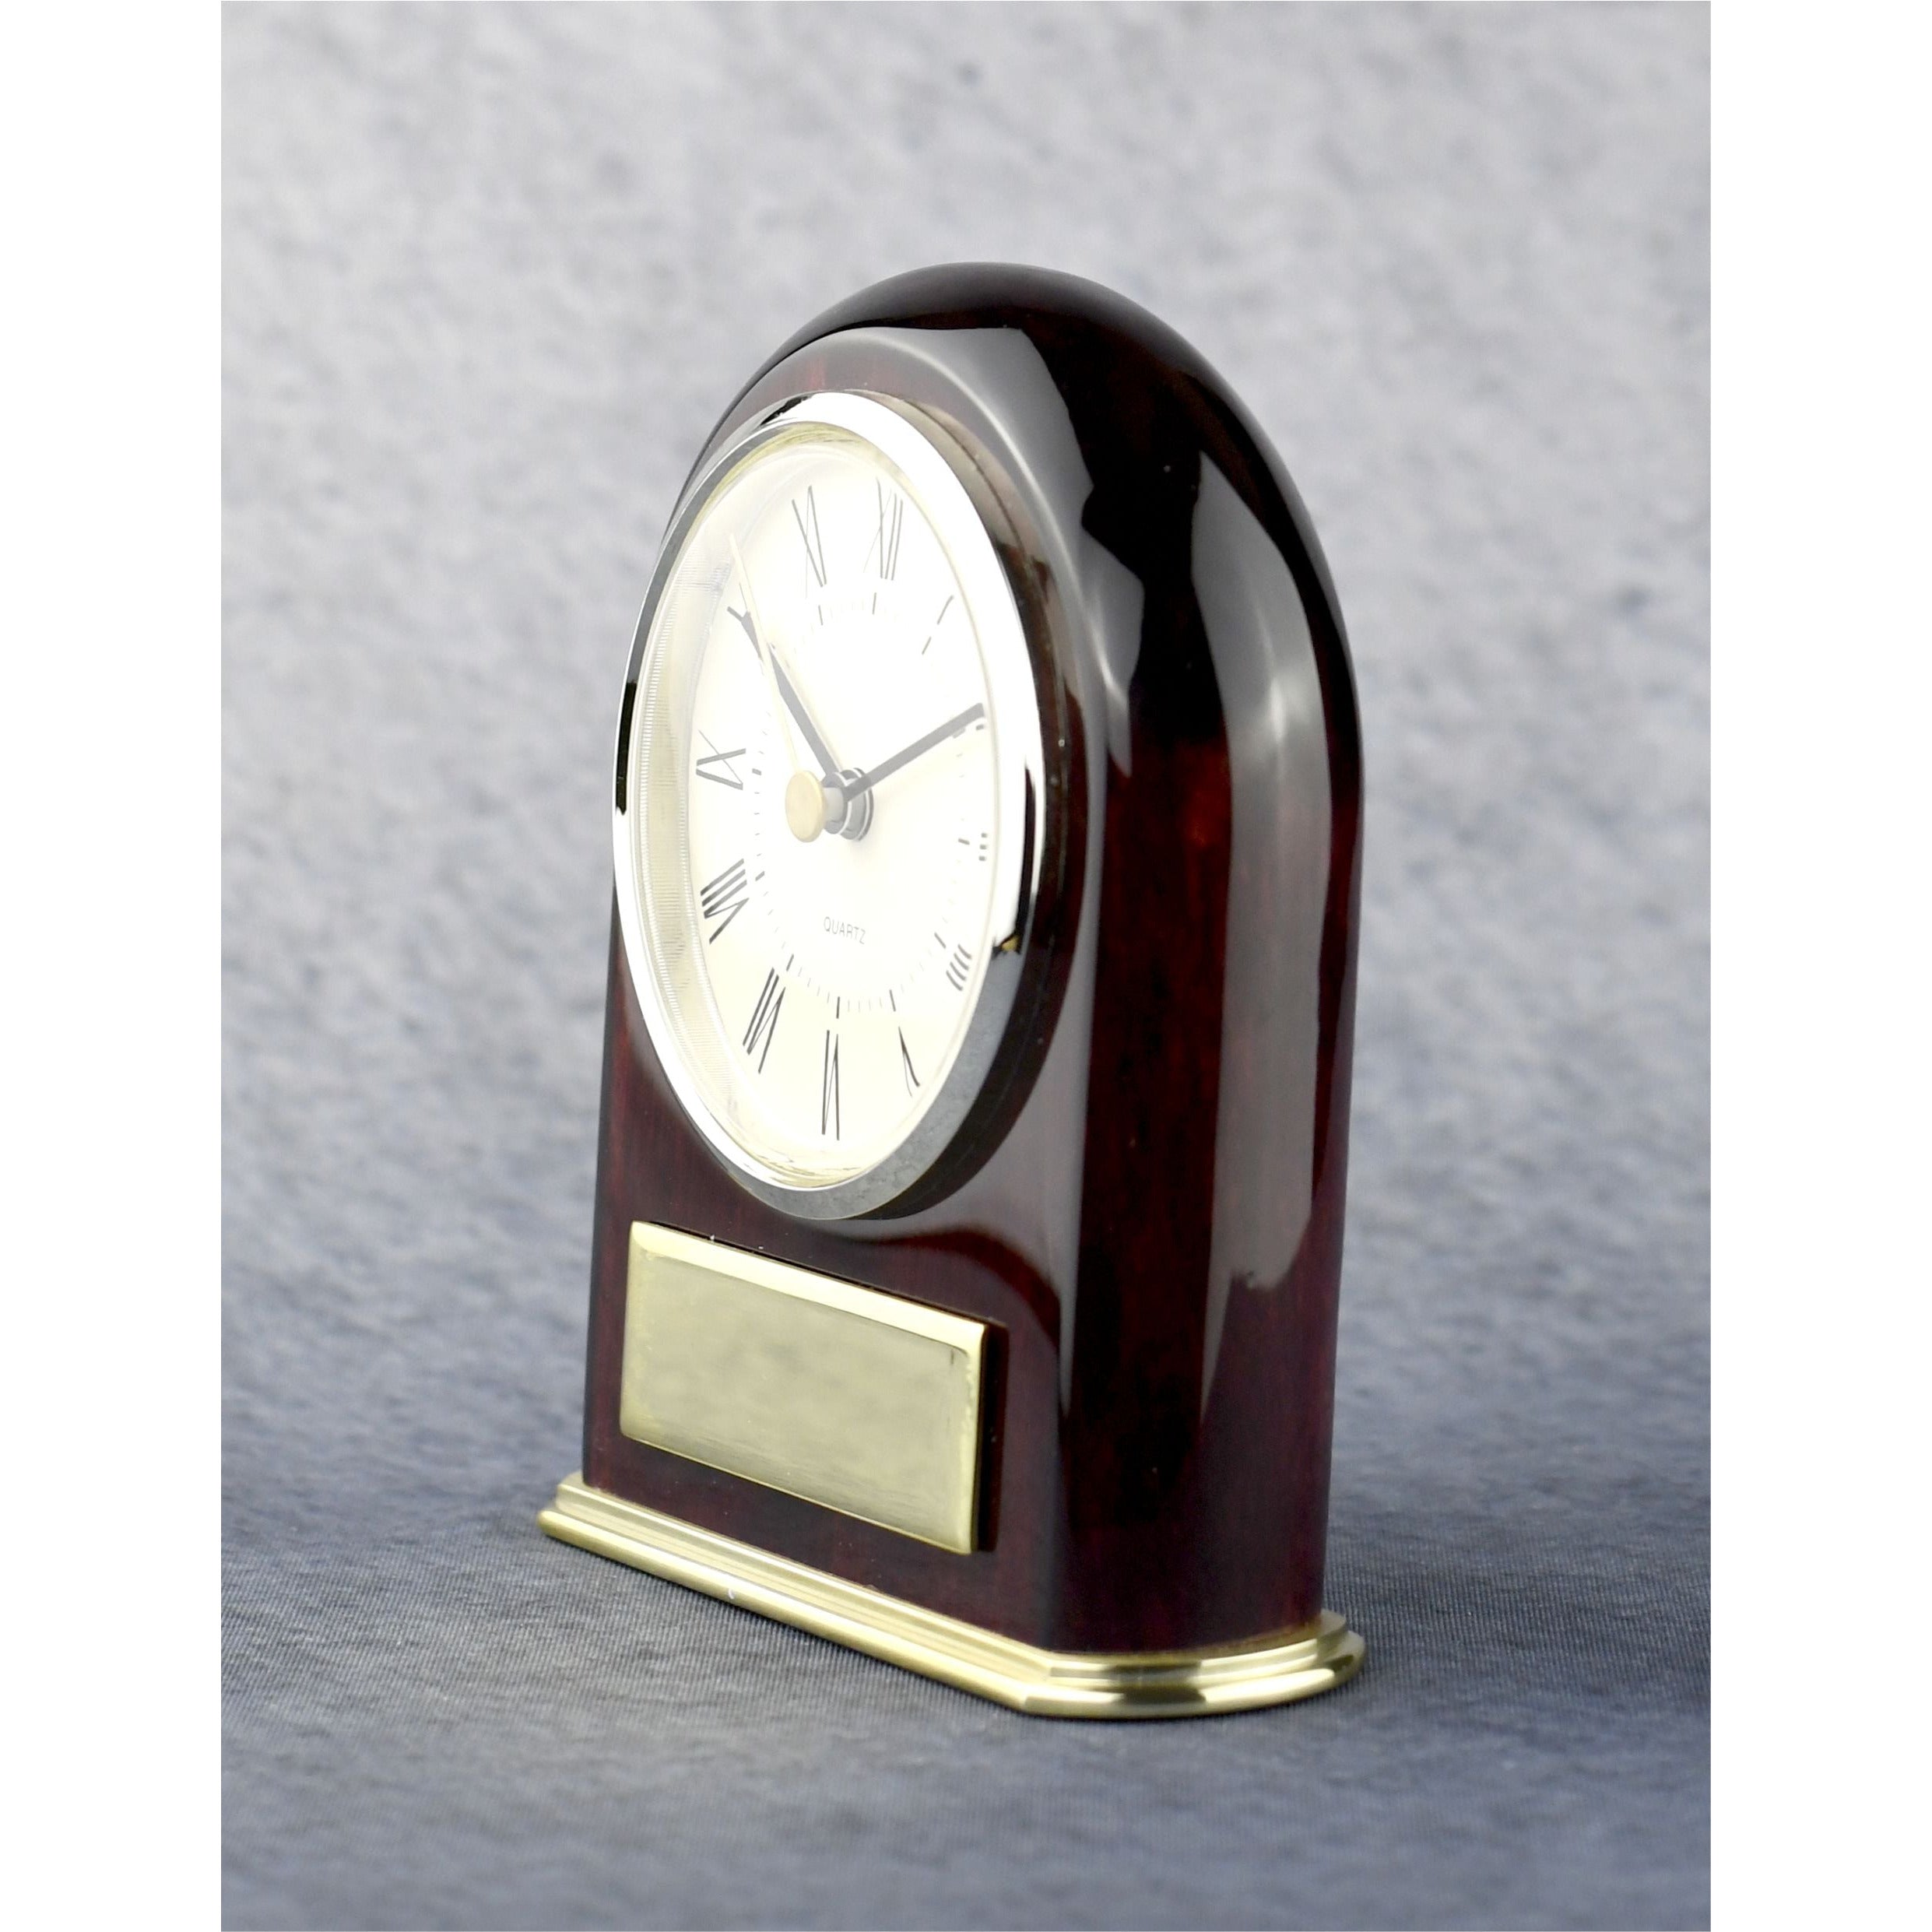 Clock Framed With Rosewood And Brass | Alliance Awards LLC.